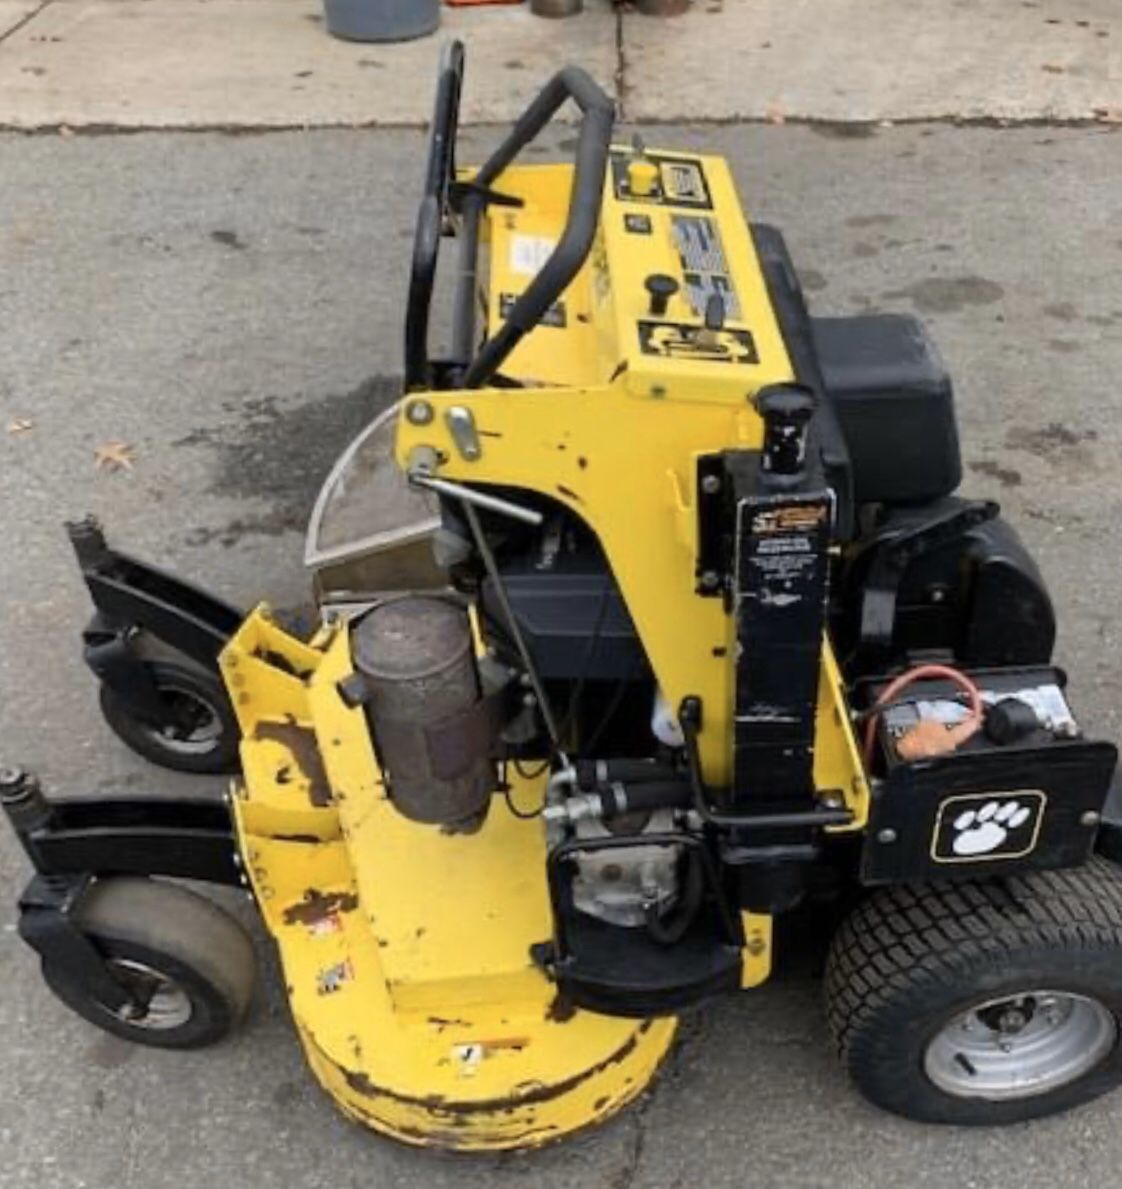 Great Dane 34” zero turn commercial lawn mower with grass catcher